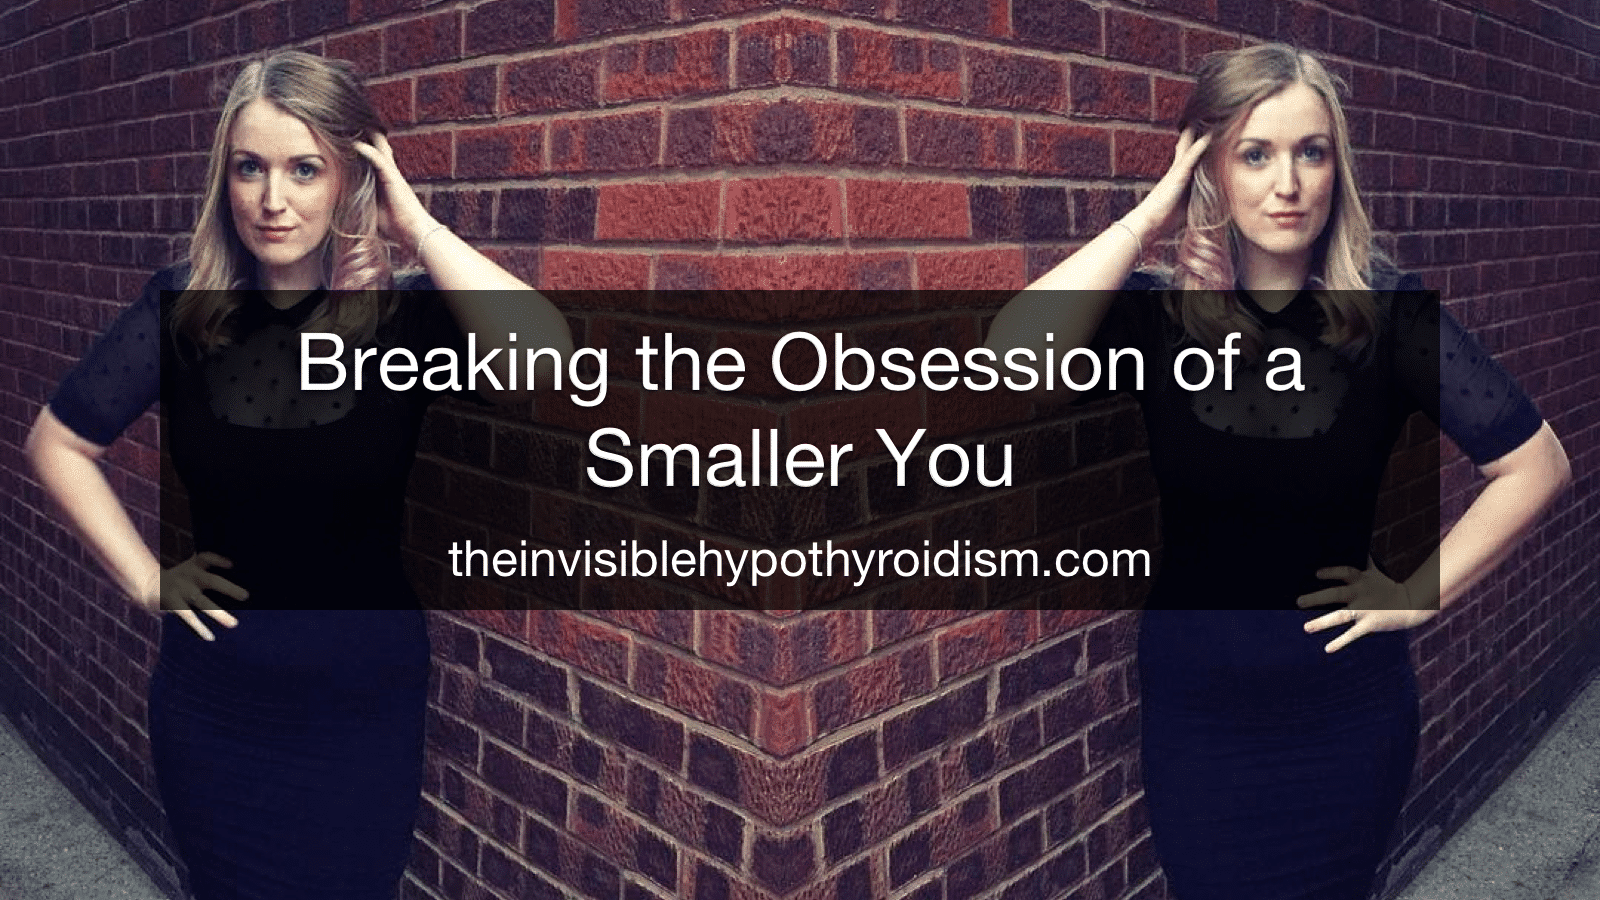 Breaking the Obsession of a Smaller You